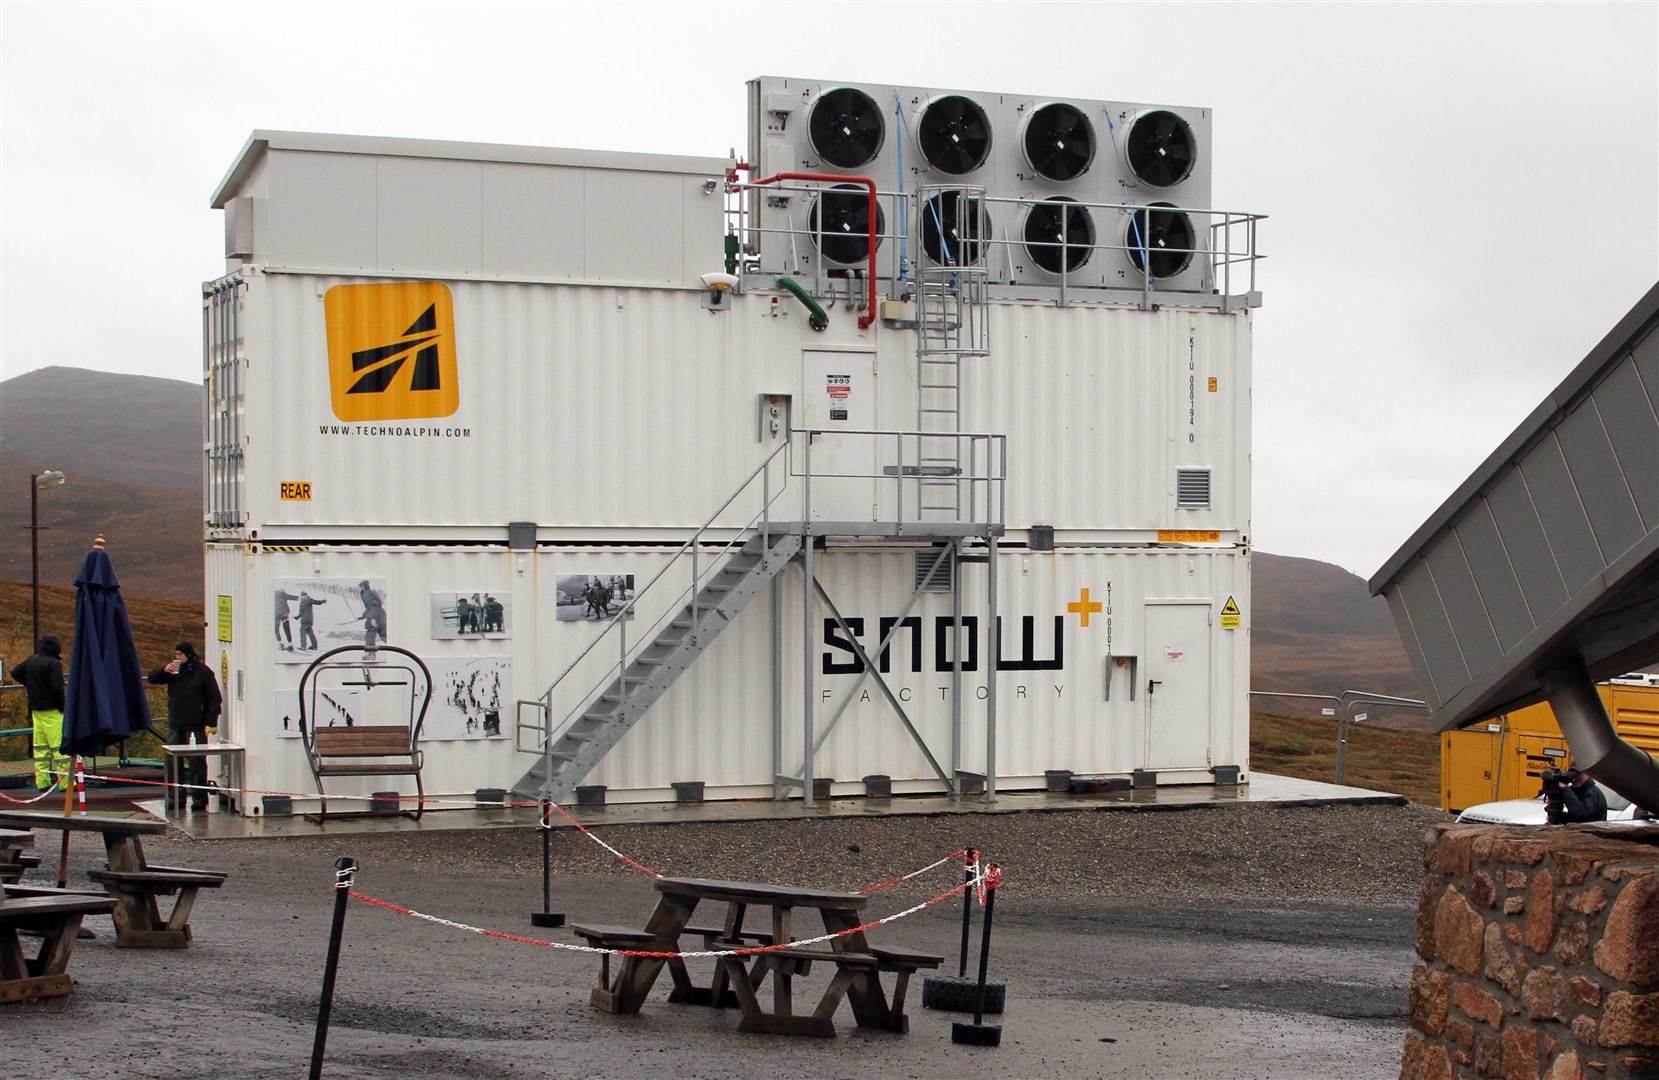 The Snowfactory at Cairngorm Mountain.